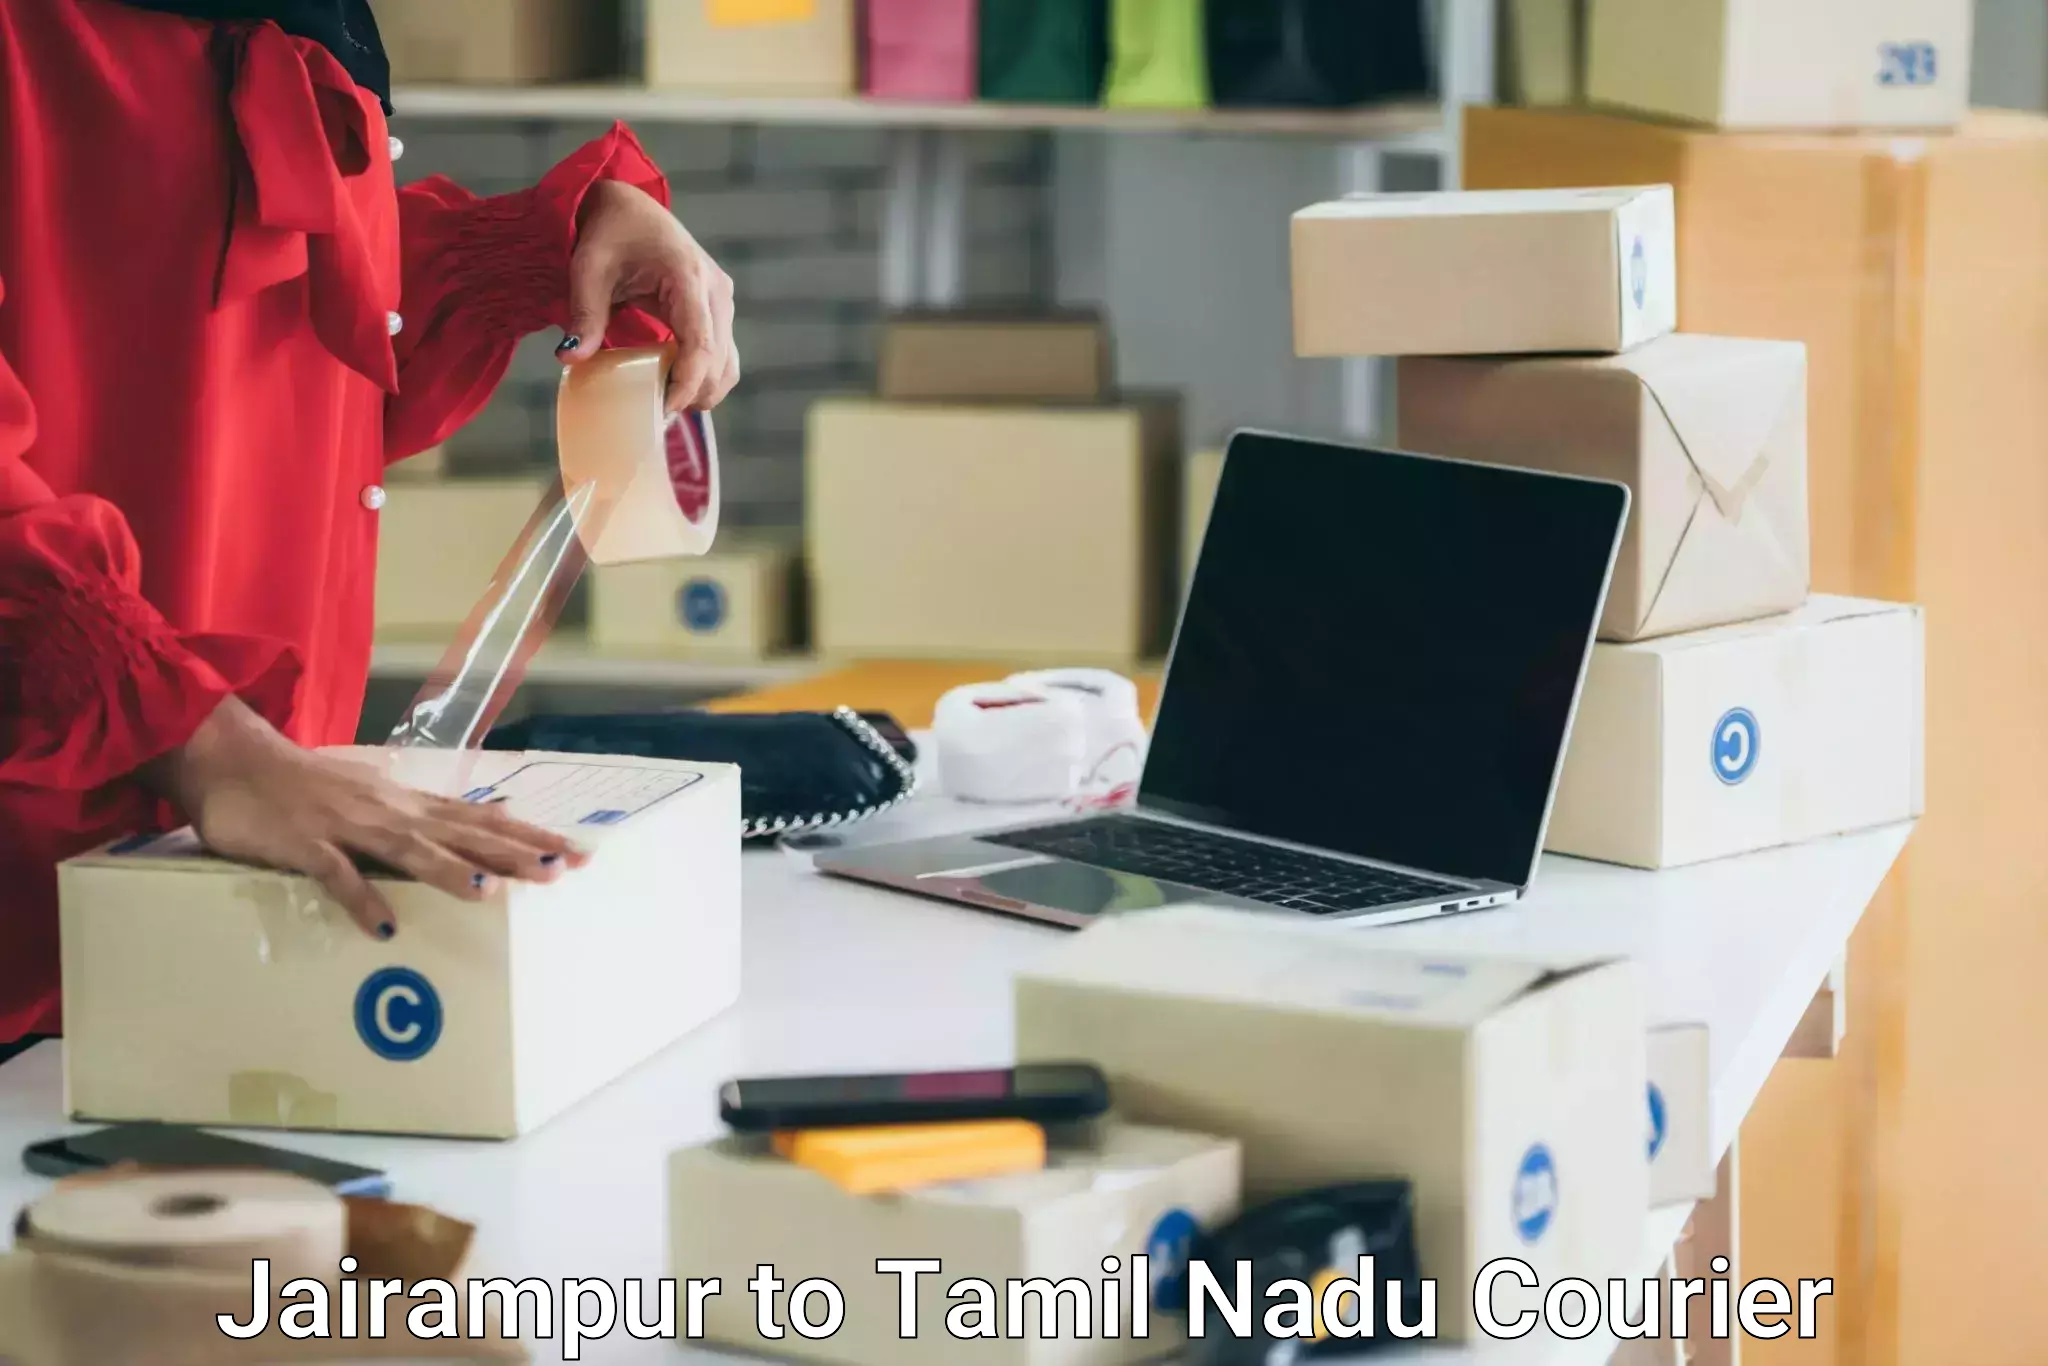 Affordable home movers Jairampur to Tamil Nadu